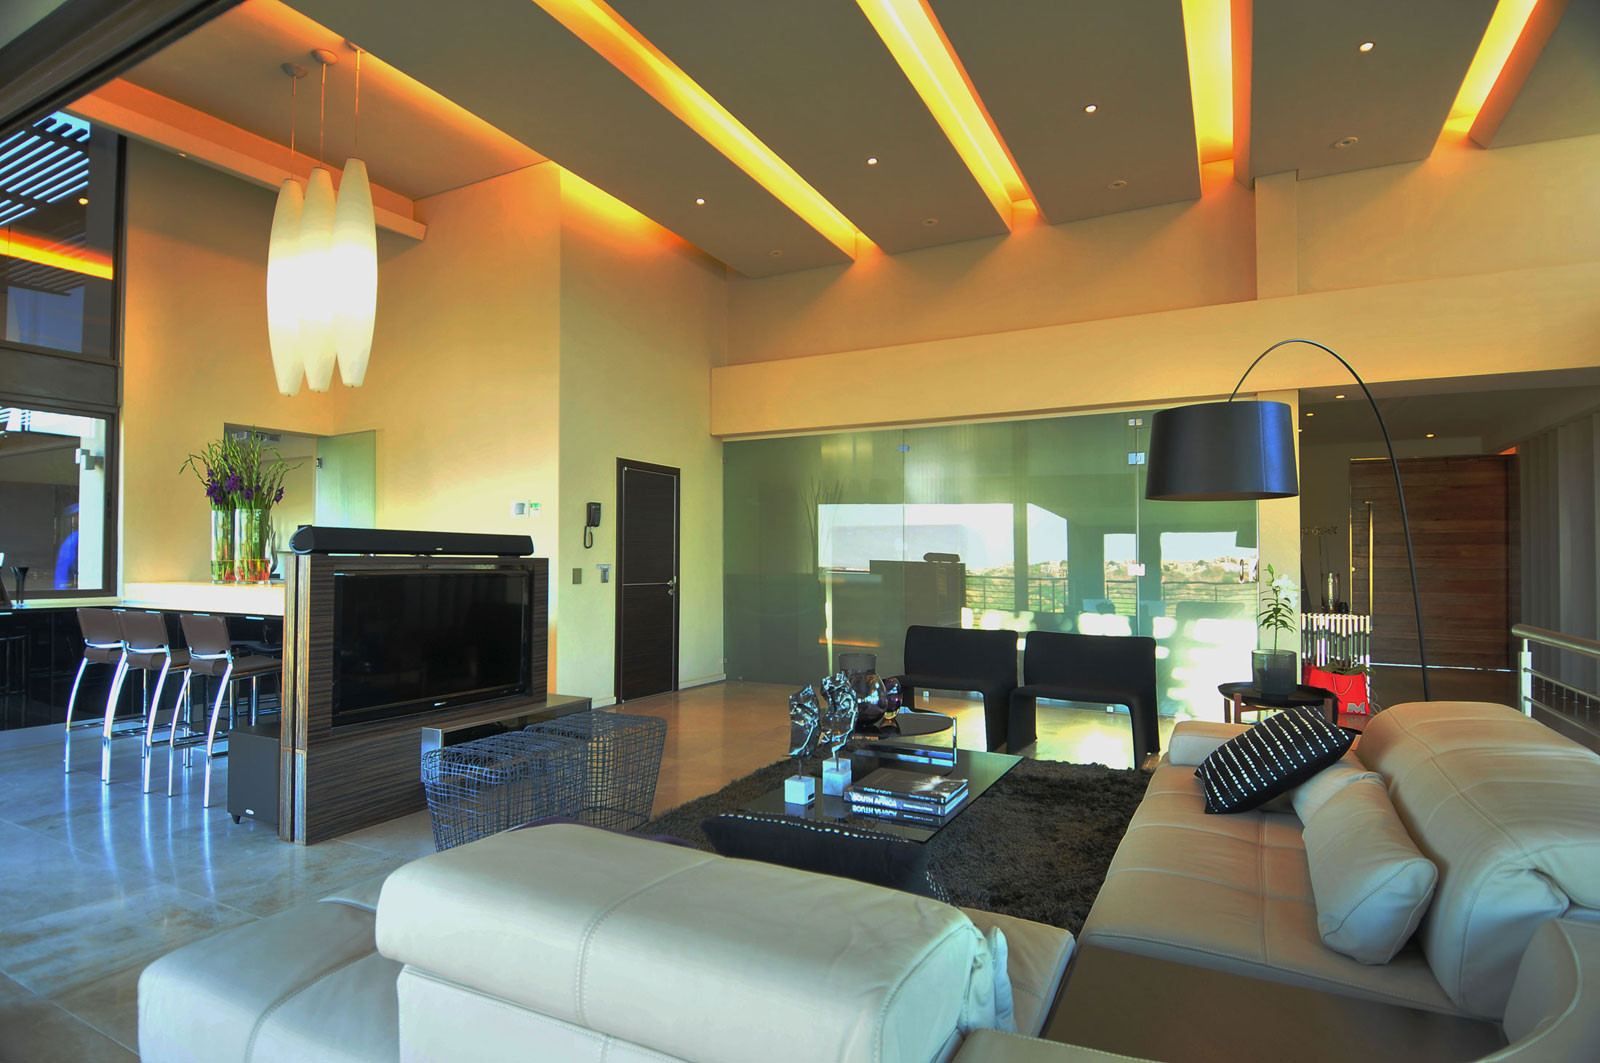 Modern Living Room Ceiling Light
 Modern Ceiling Lights with Hanged Pendant Fixtures and